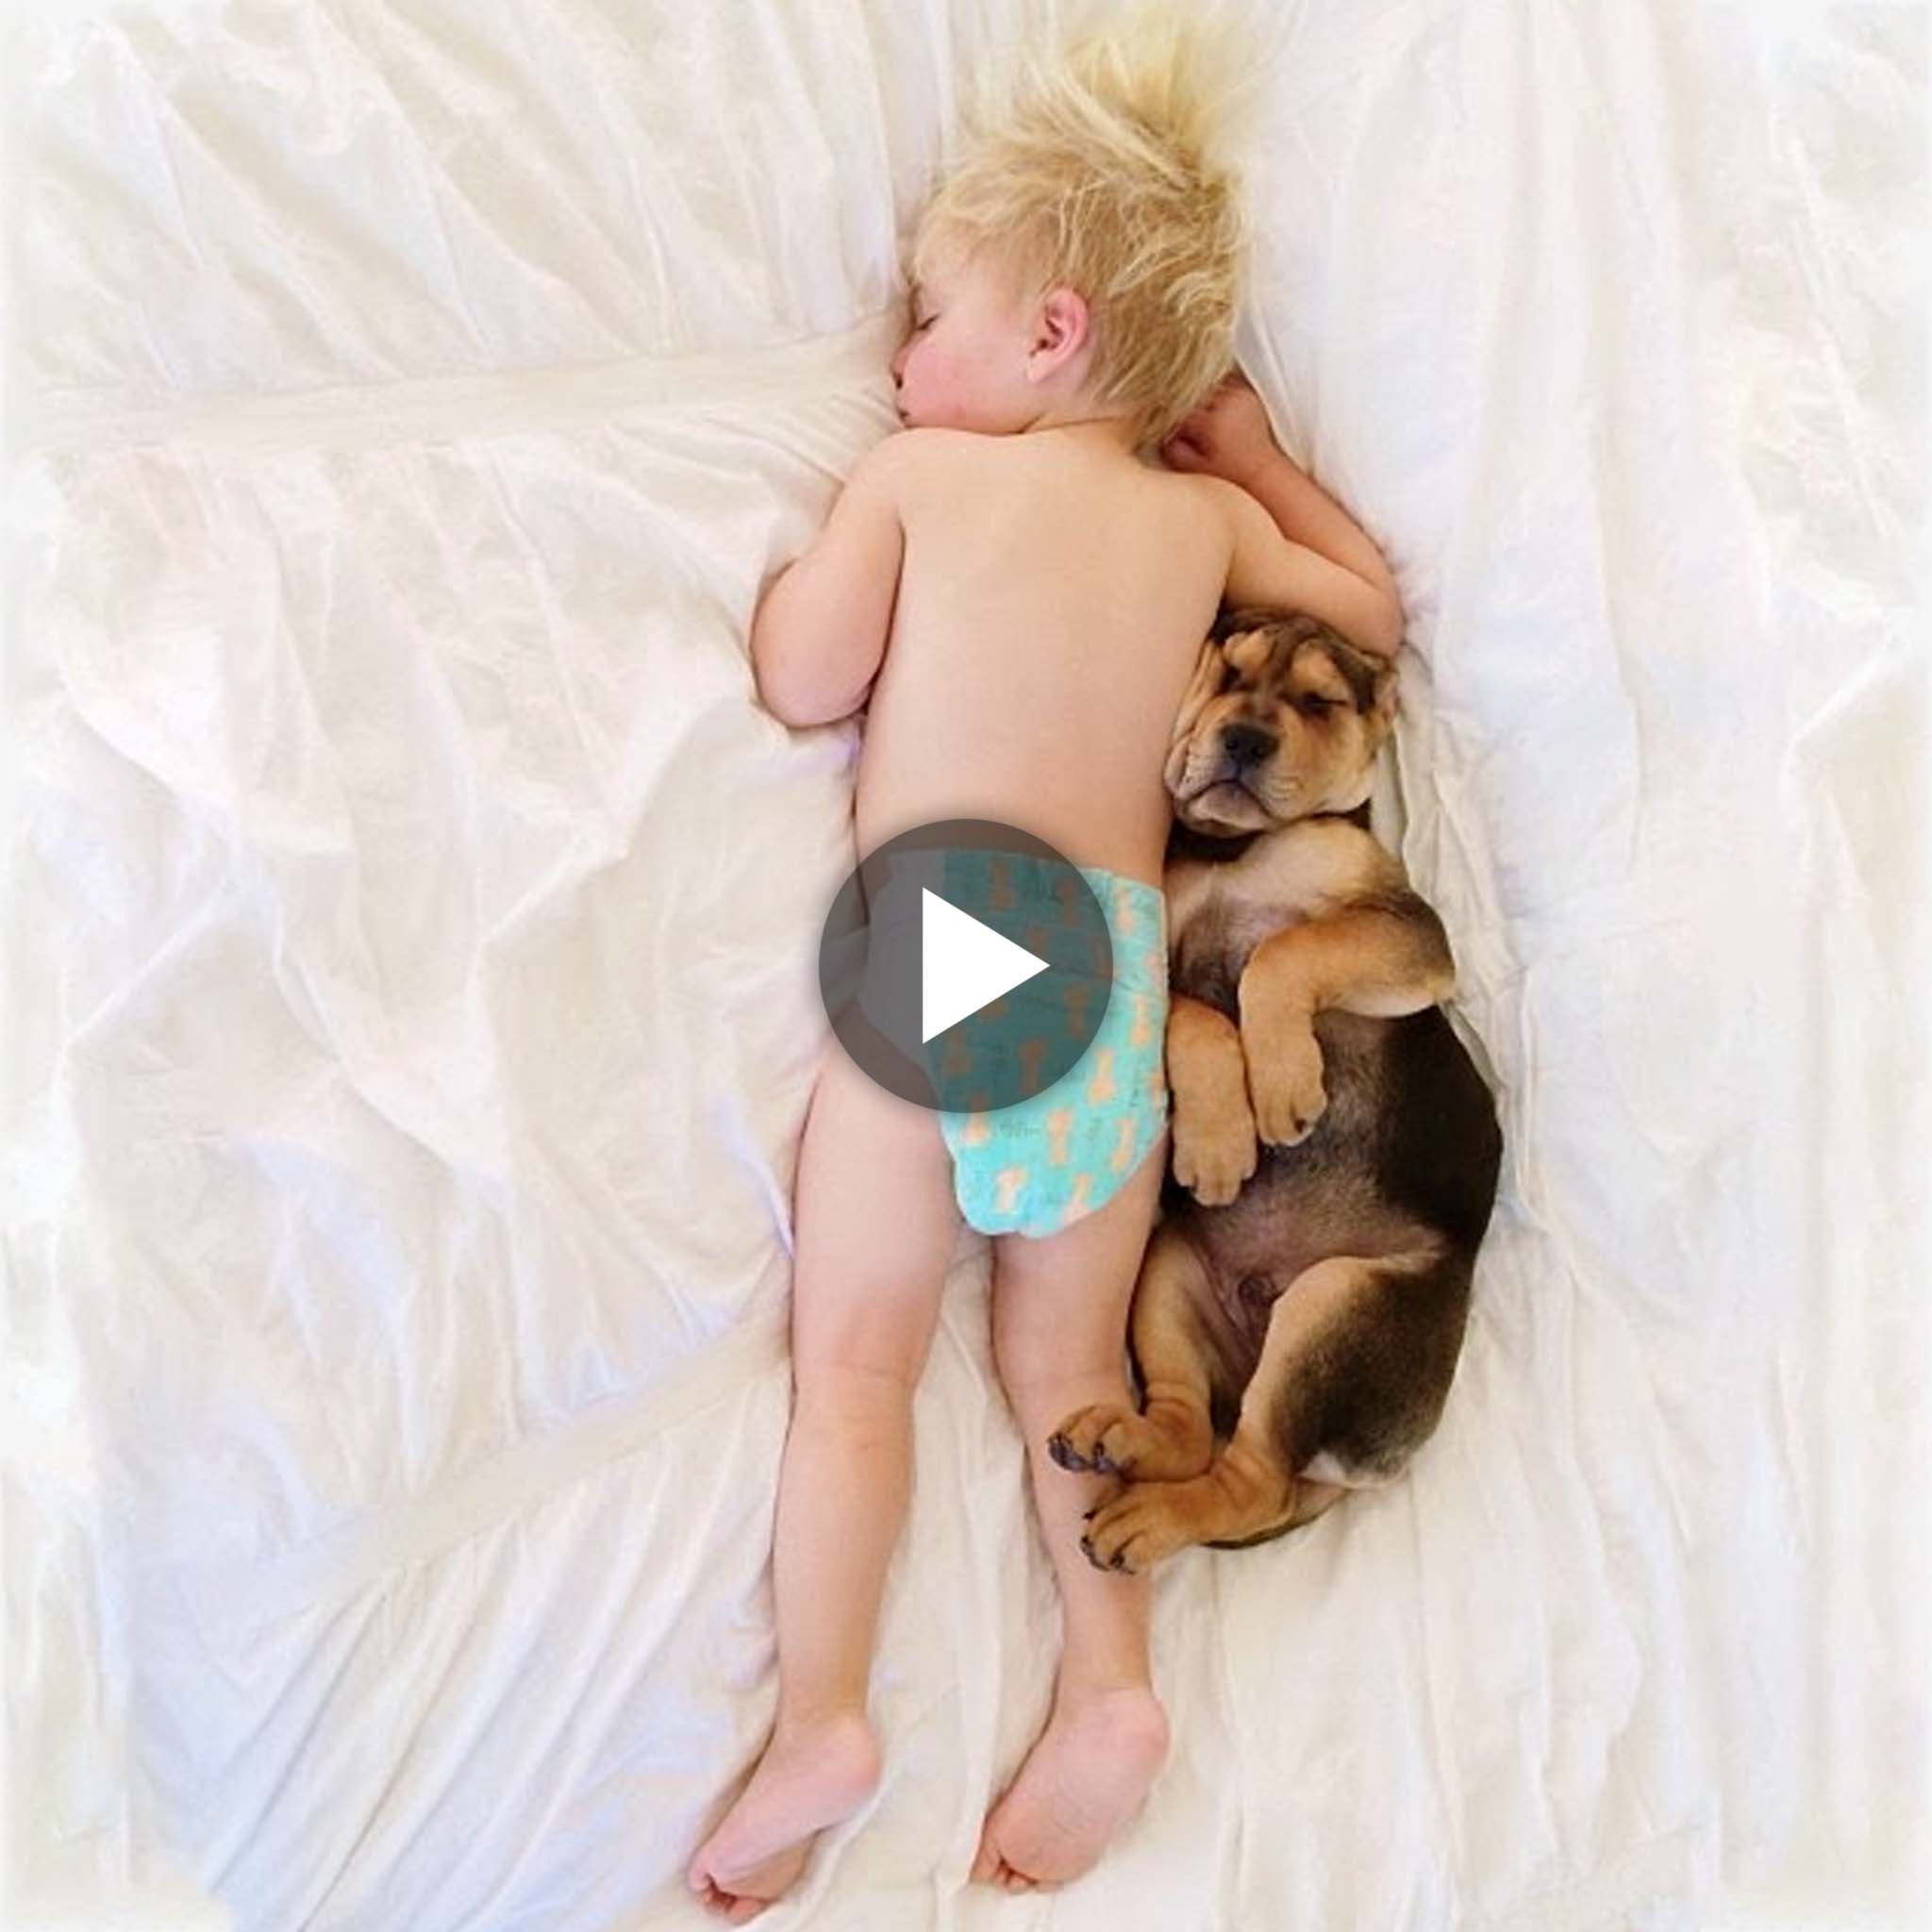 “The little master and the dog must stay together from time to time to sleep, creating precious moments together” (Video)